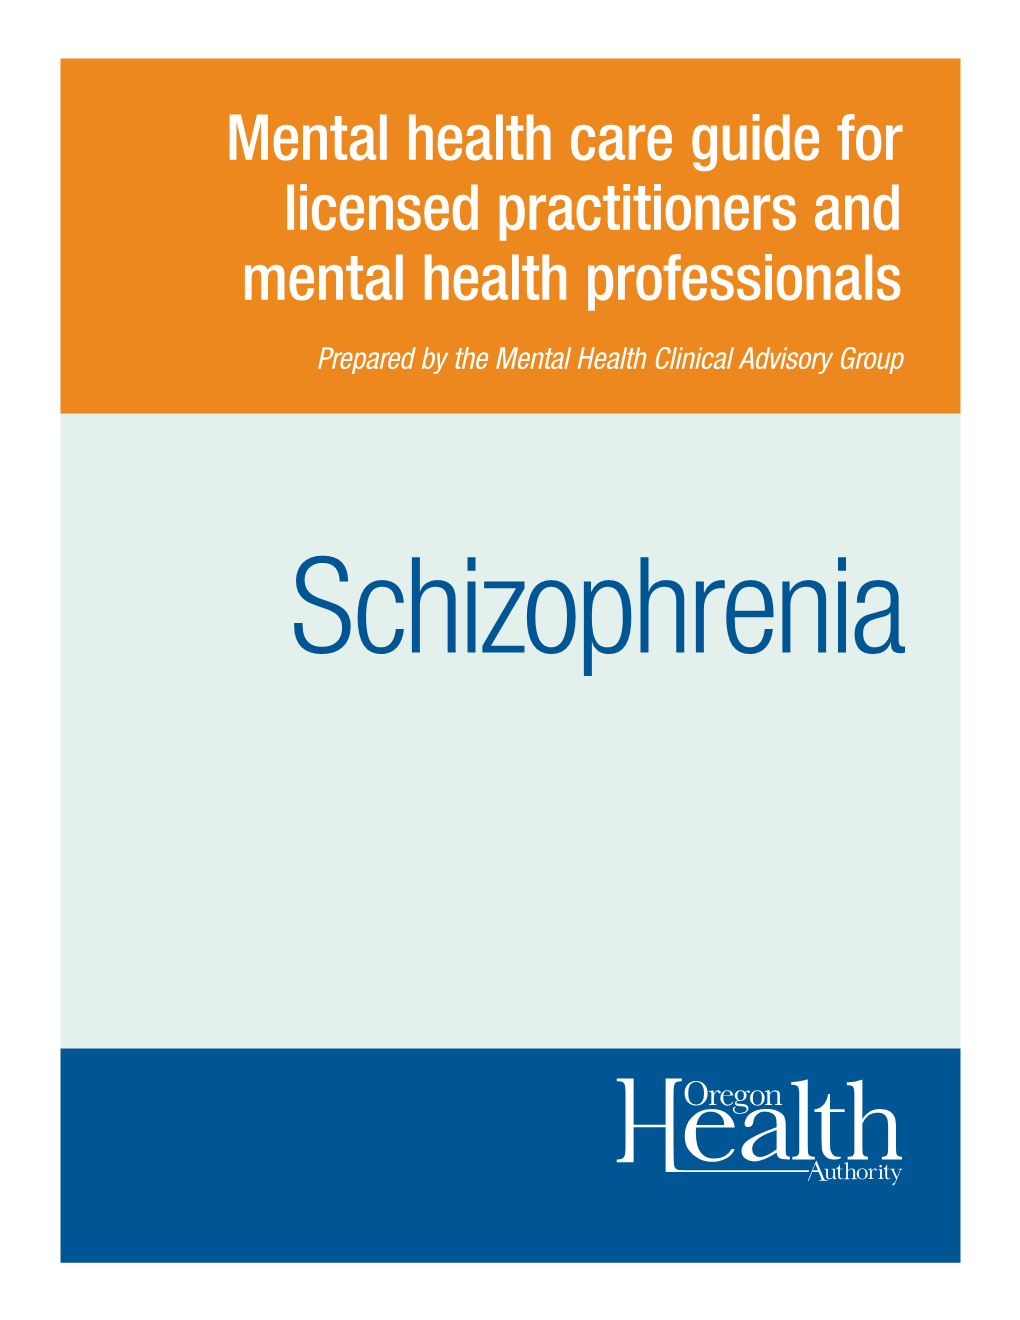 Mental Health Care Guide for Licensed Practitioners and Mental Health Professionals